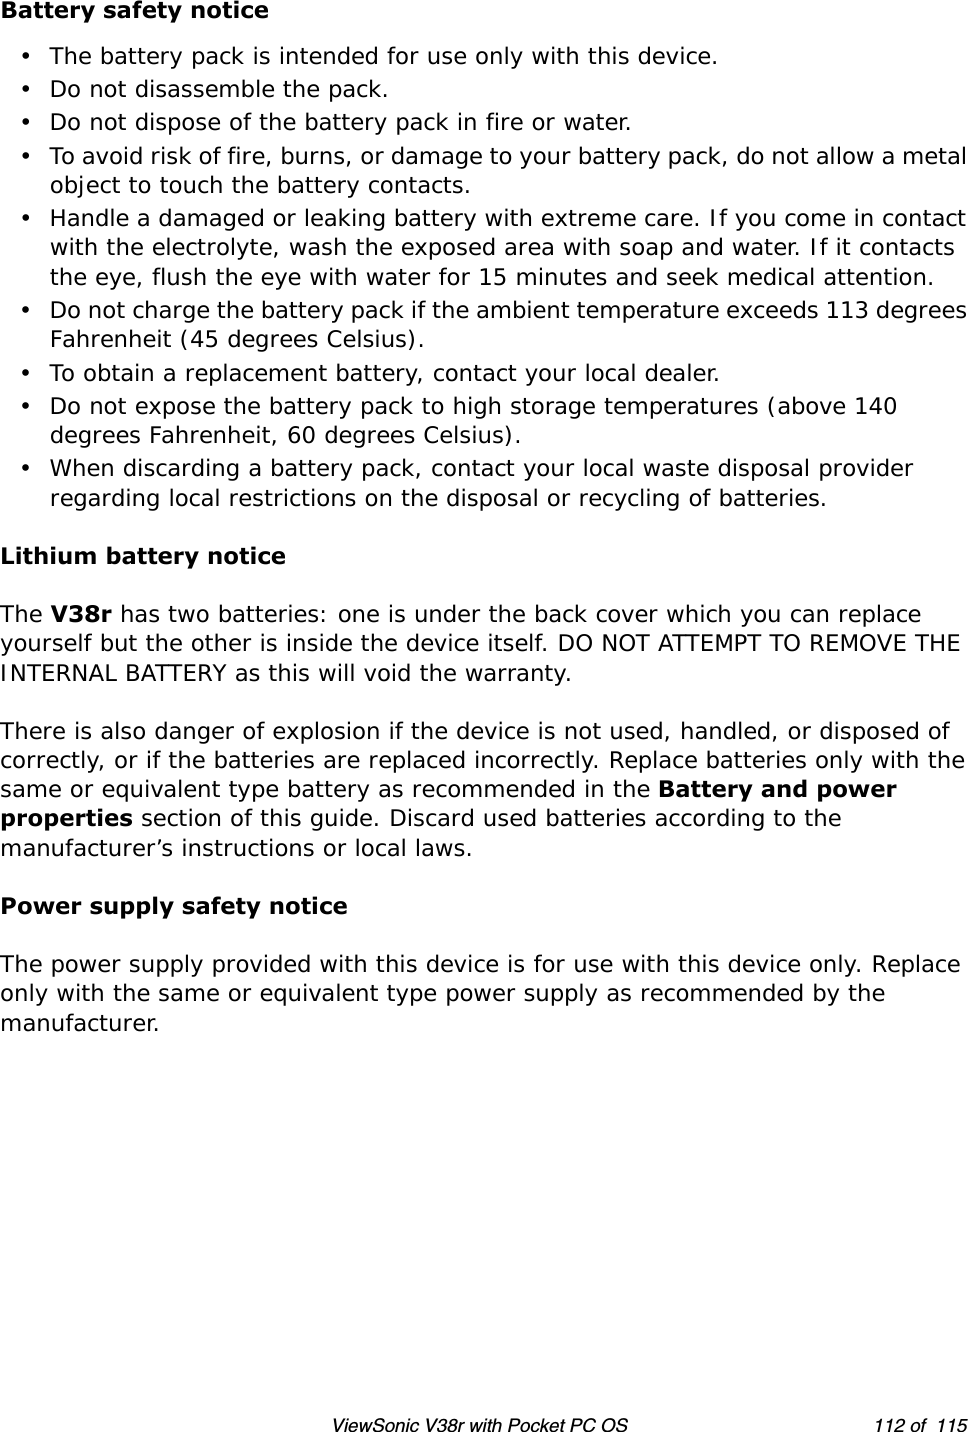 ViewSonic V38r with Pocket PC OS 112 of  115Battery safety notice• The battery pack is intended for use only with this device.• Do not disassemble the pack.• Do not dispose of the battery pack in fire or water.• To avoid risk of fire, burns, or damage to your battery pack, do not allow a metal object to touch the battery contacts.• Handle a damaged or leaking battery with extreme care. If you come in contact with the electrolyte, wash the exposed area with soap and water. If it contacts the eye, flush the eye with water for 15 minutes and seek medical attention.• Do not charge the battery pack if the ambient temperature exceeds 113 degrees Fahrenheit (45 degrees Celsius).• To obtain a replacement battery, contact your local dealer.• Do not expose the battery pack to high storage temperatures (above 140 degrees Fahrenheit, 60 degrees Celsius).• When discarding a battery pack, contact your local waste disposal provider regarding local restrictions on the disposal or recycling of batteries.Lithium battery noticeThe V38r has two batteries: one is under the back cover which you can replace yourself but the other is inside the device itself. DO NOT ATTEMPT TO REMOVE THE INTERNAL BATTERY as this will void the warranty.There is also danger of explosion if the device is not used, handled, or disposed of correctly, or if the batteries are replaced incorrectly. Replace batteries only with the same or equivalent type battery as recommended in the Battery and power properties section of this guide. Discard used batteries according to the manufacturer’s instructions or local laws.Power supply safety noticeThe power supply provided with this device is for use with this device only. Replace only with the same or equivalent type power supply as recommended by the manufacturer.